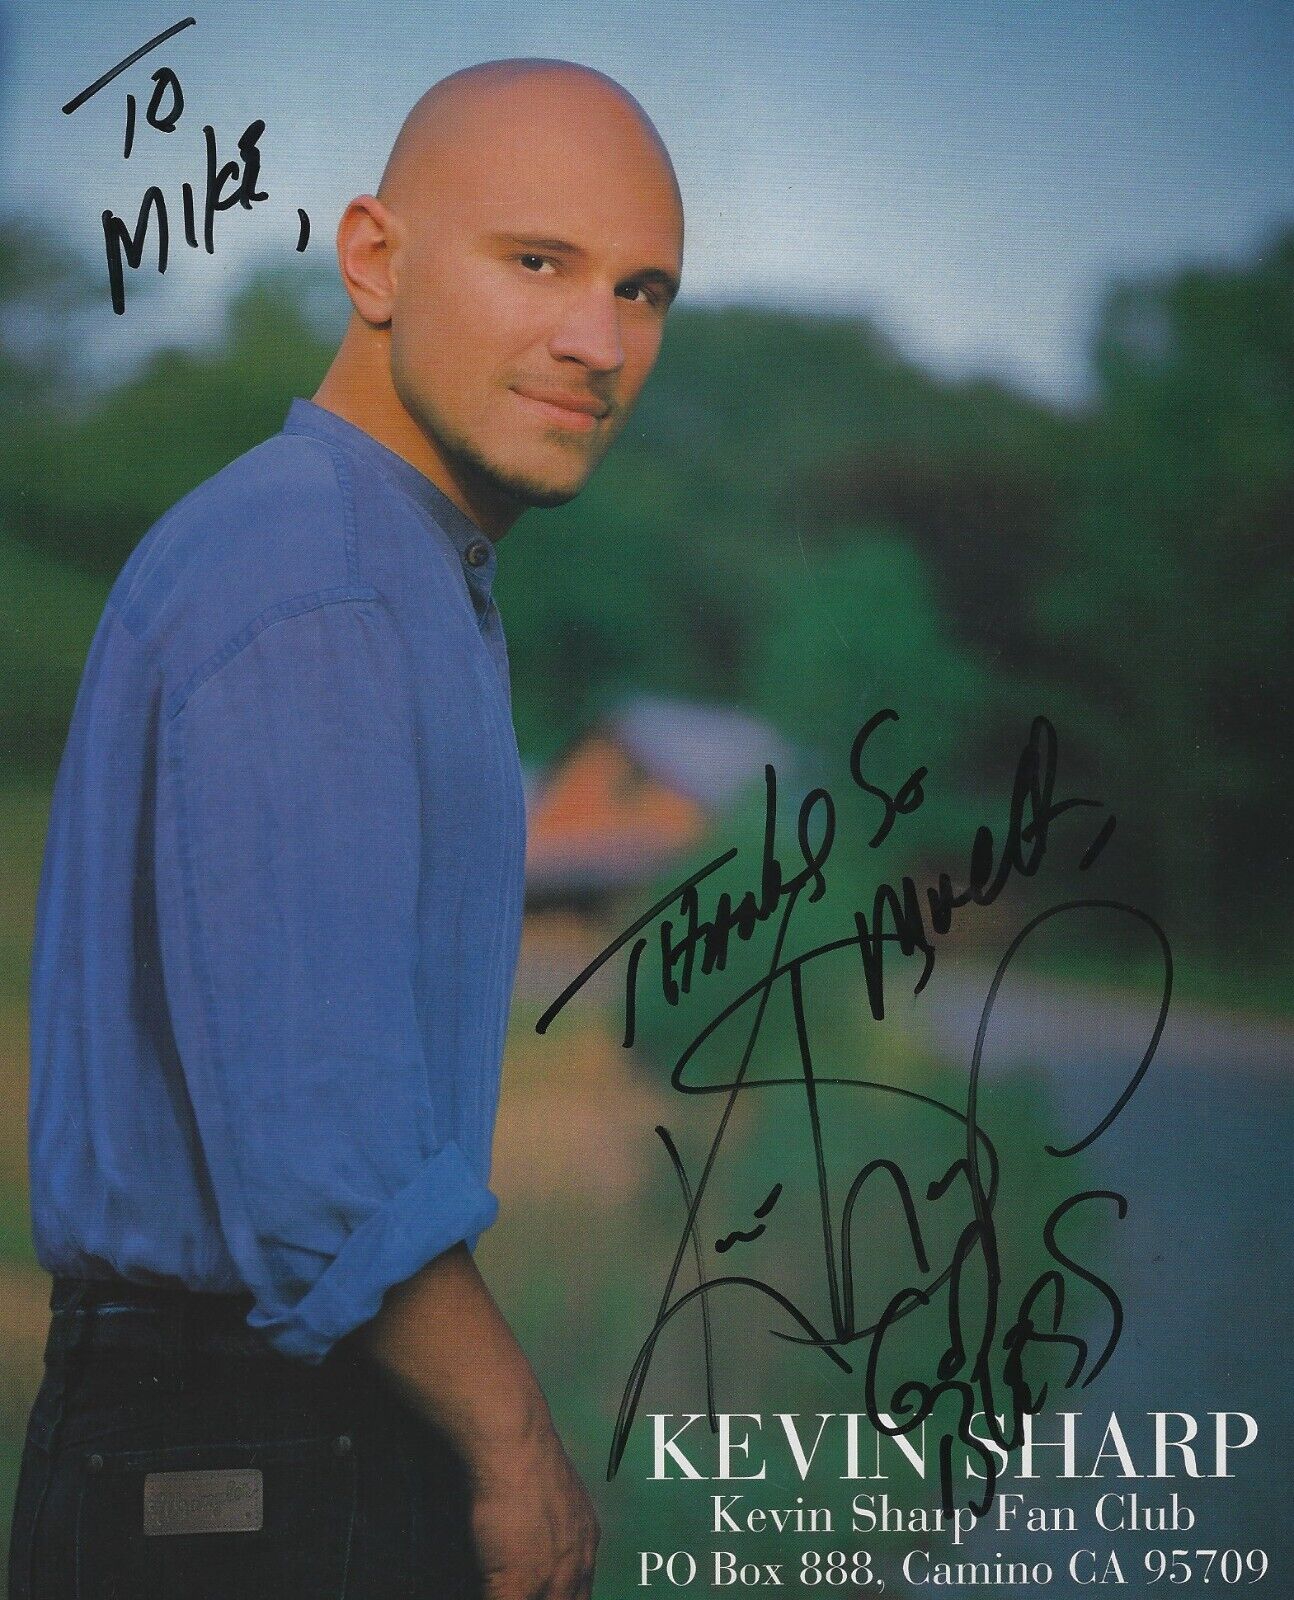 Kevin Sharp & McCanless Autographed Signed 8x10 Photo - Country Music - w/COA